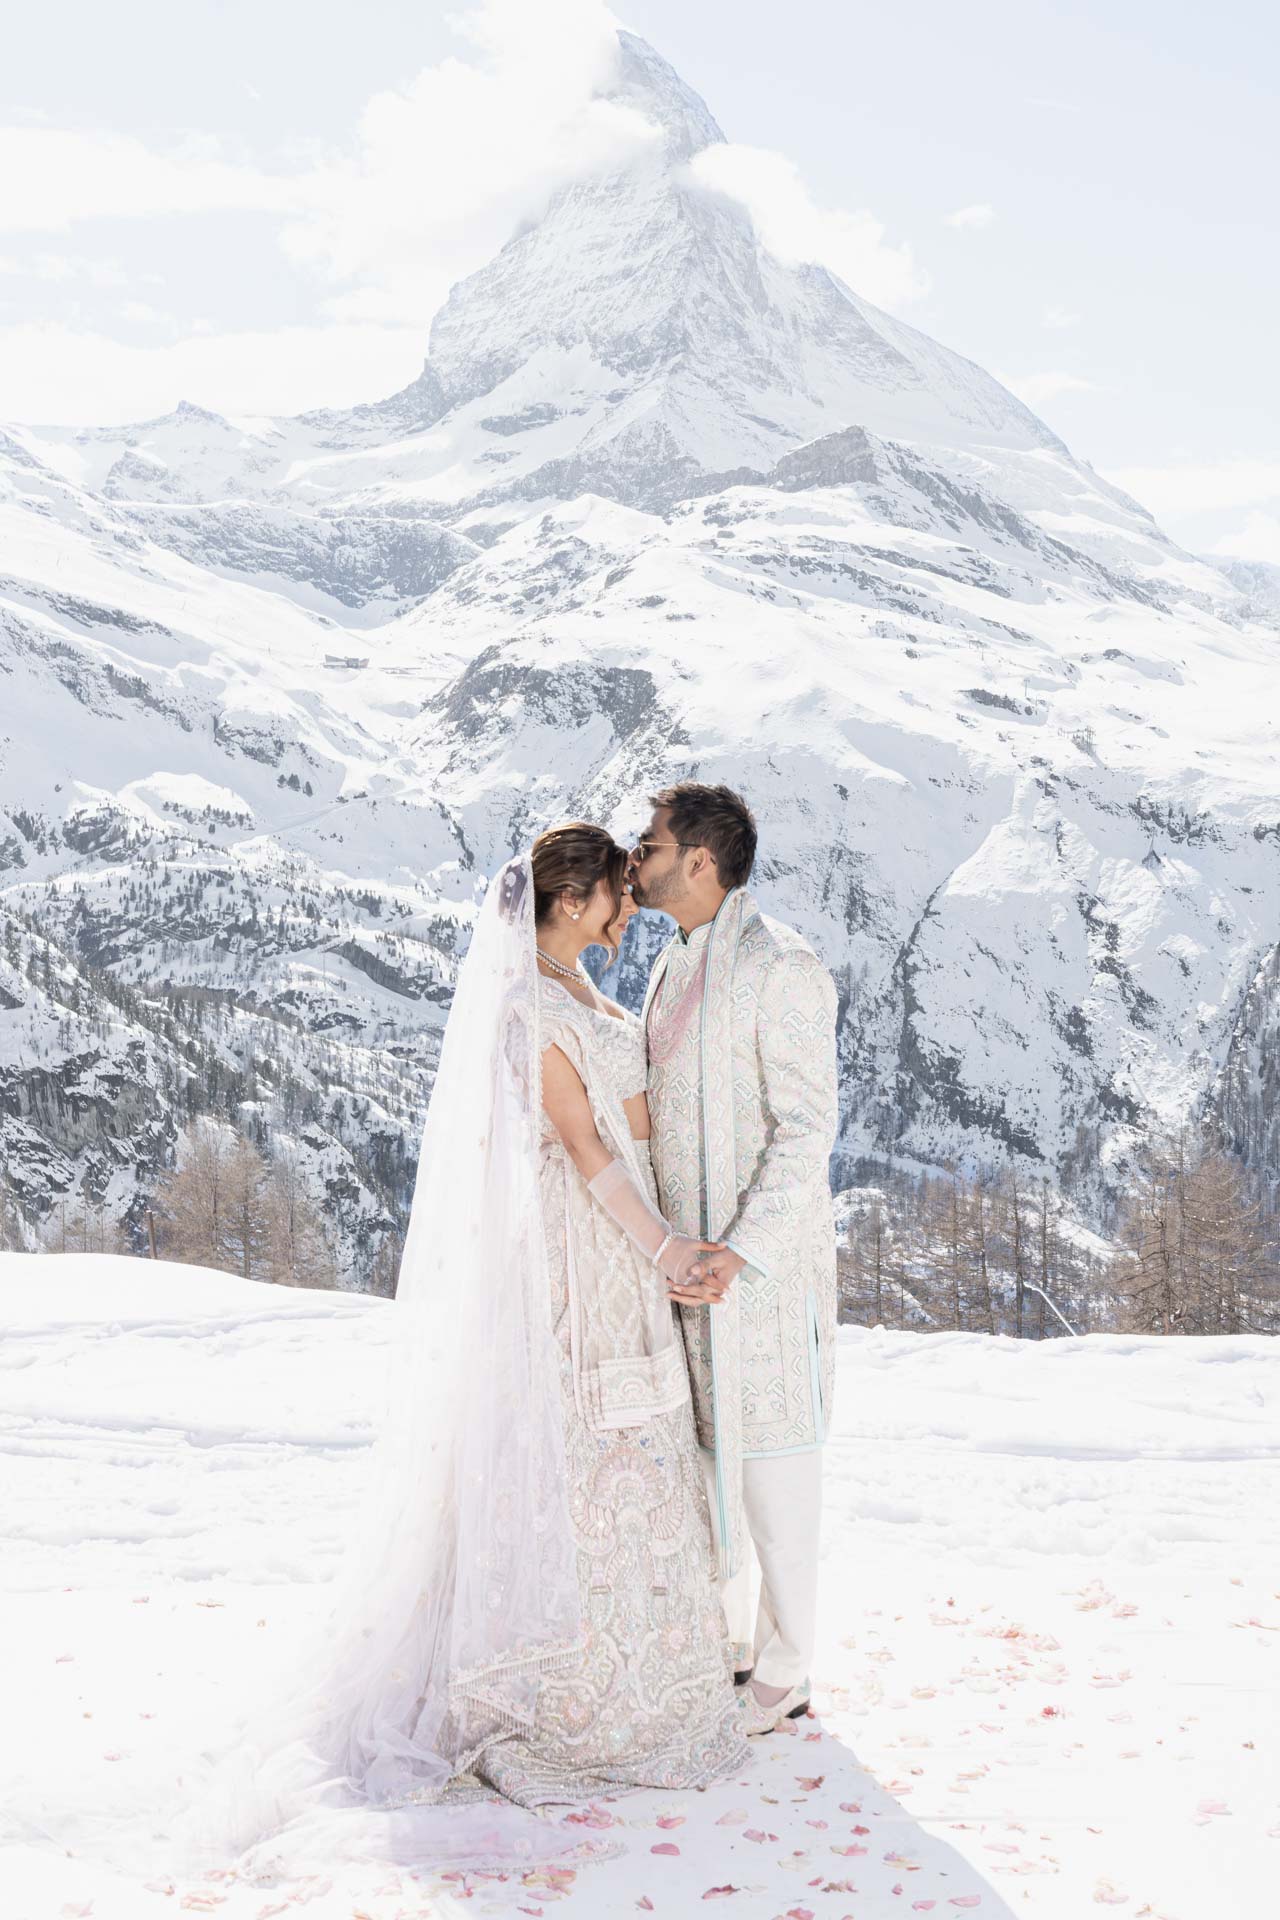 A wedding on the slopes of Matterhorn mountain, between the white of snow and the colors of India :: 42